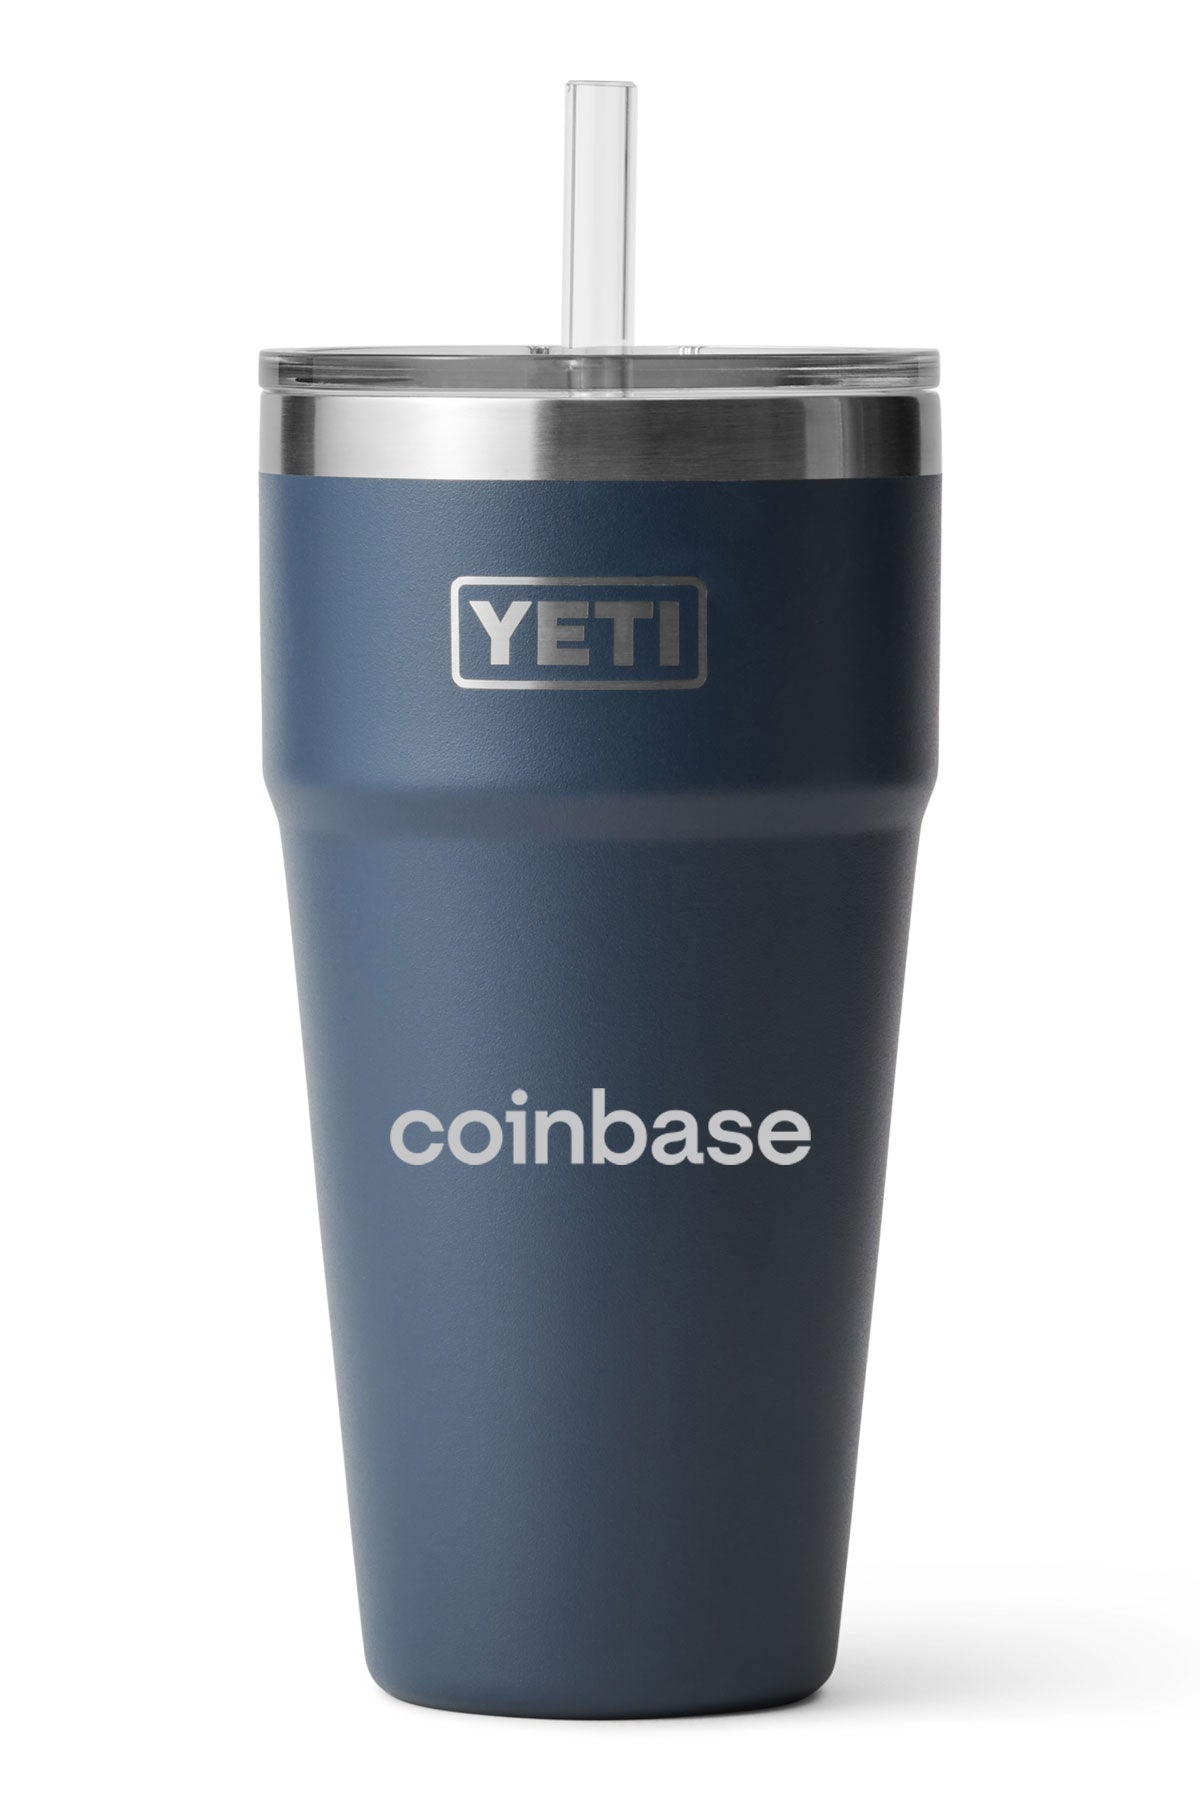 YETI Stackable Pints 26 oz with Straw Lid, Navy [Coinbase]